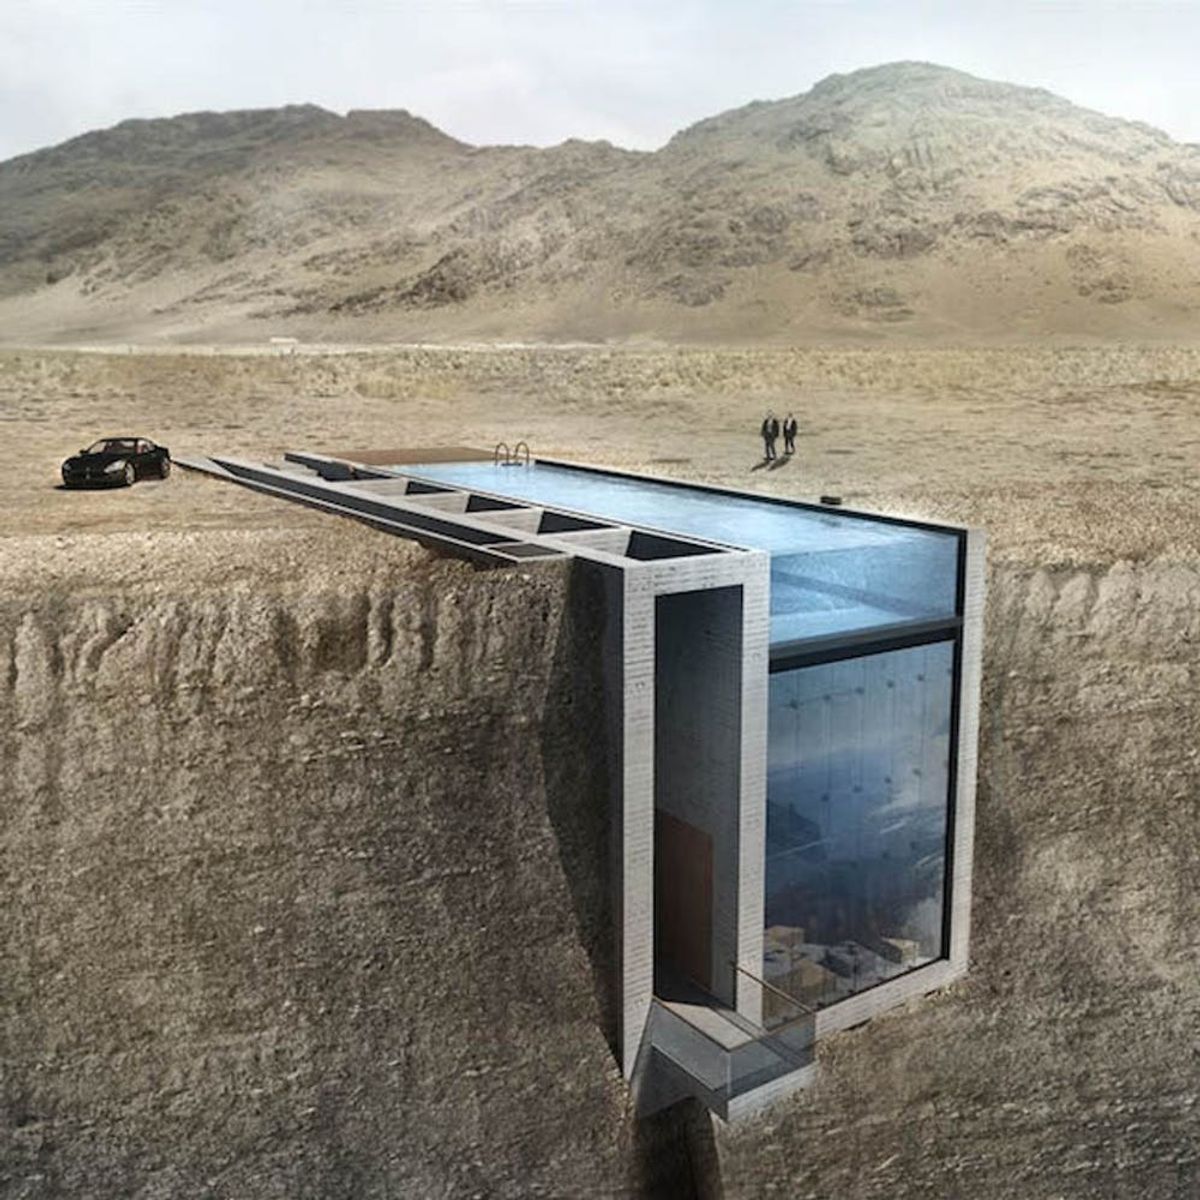 This Crazy Cool Home Concept Is NOT for People Afraid of Heights